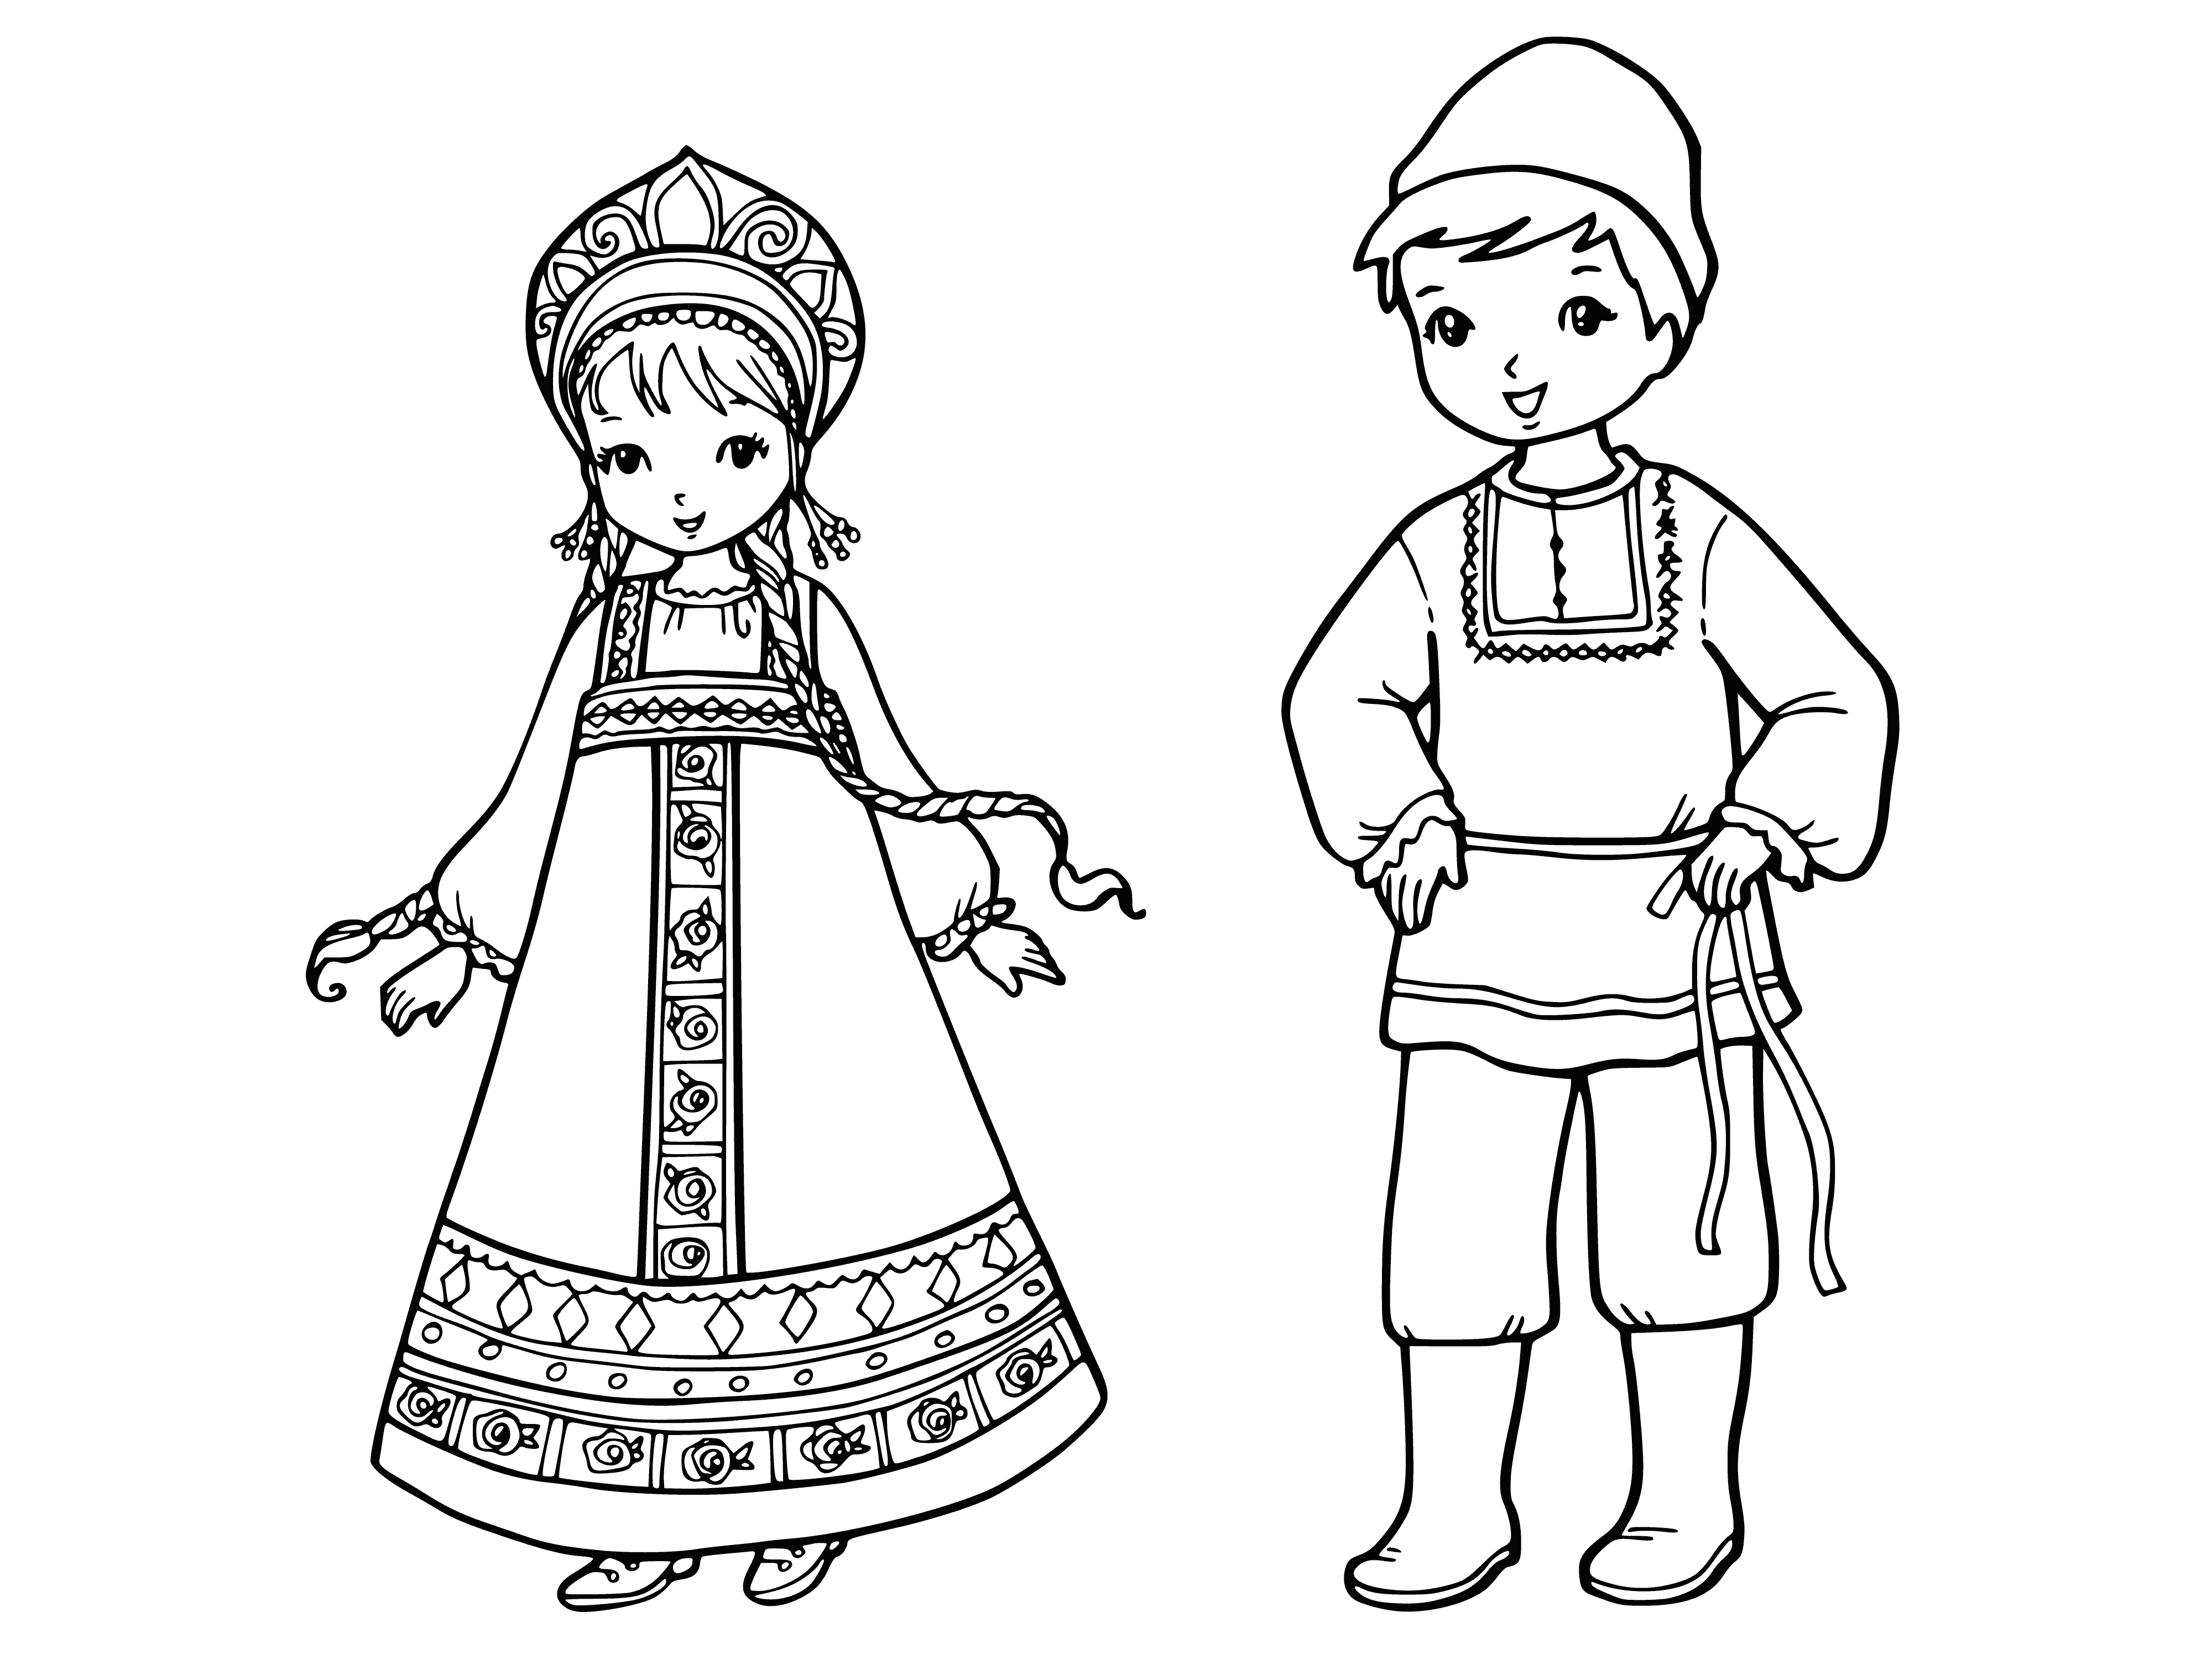 coloring page: Three Russian children in traditional costumes: girl with white/red blouse, red scarf & skirt, boy in white/blue shirt & pants, other boy in black shirt/pants & kokoshnik. All wearing hats.